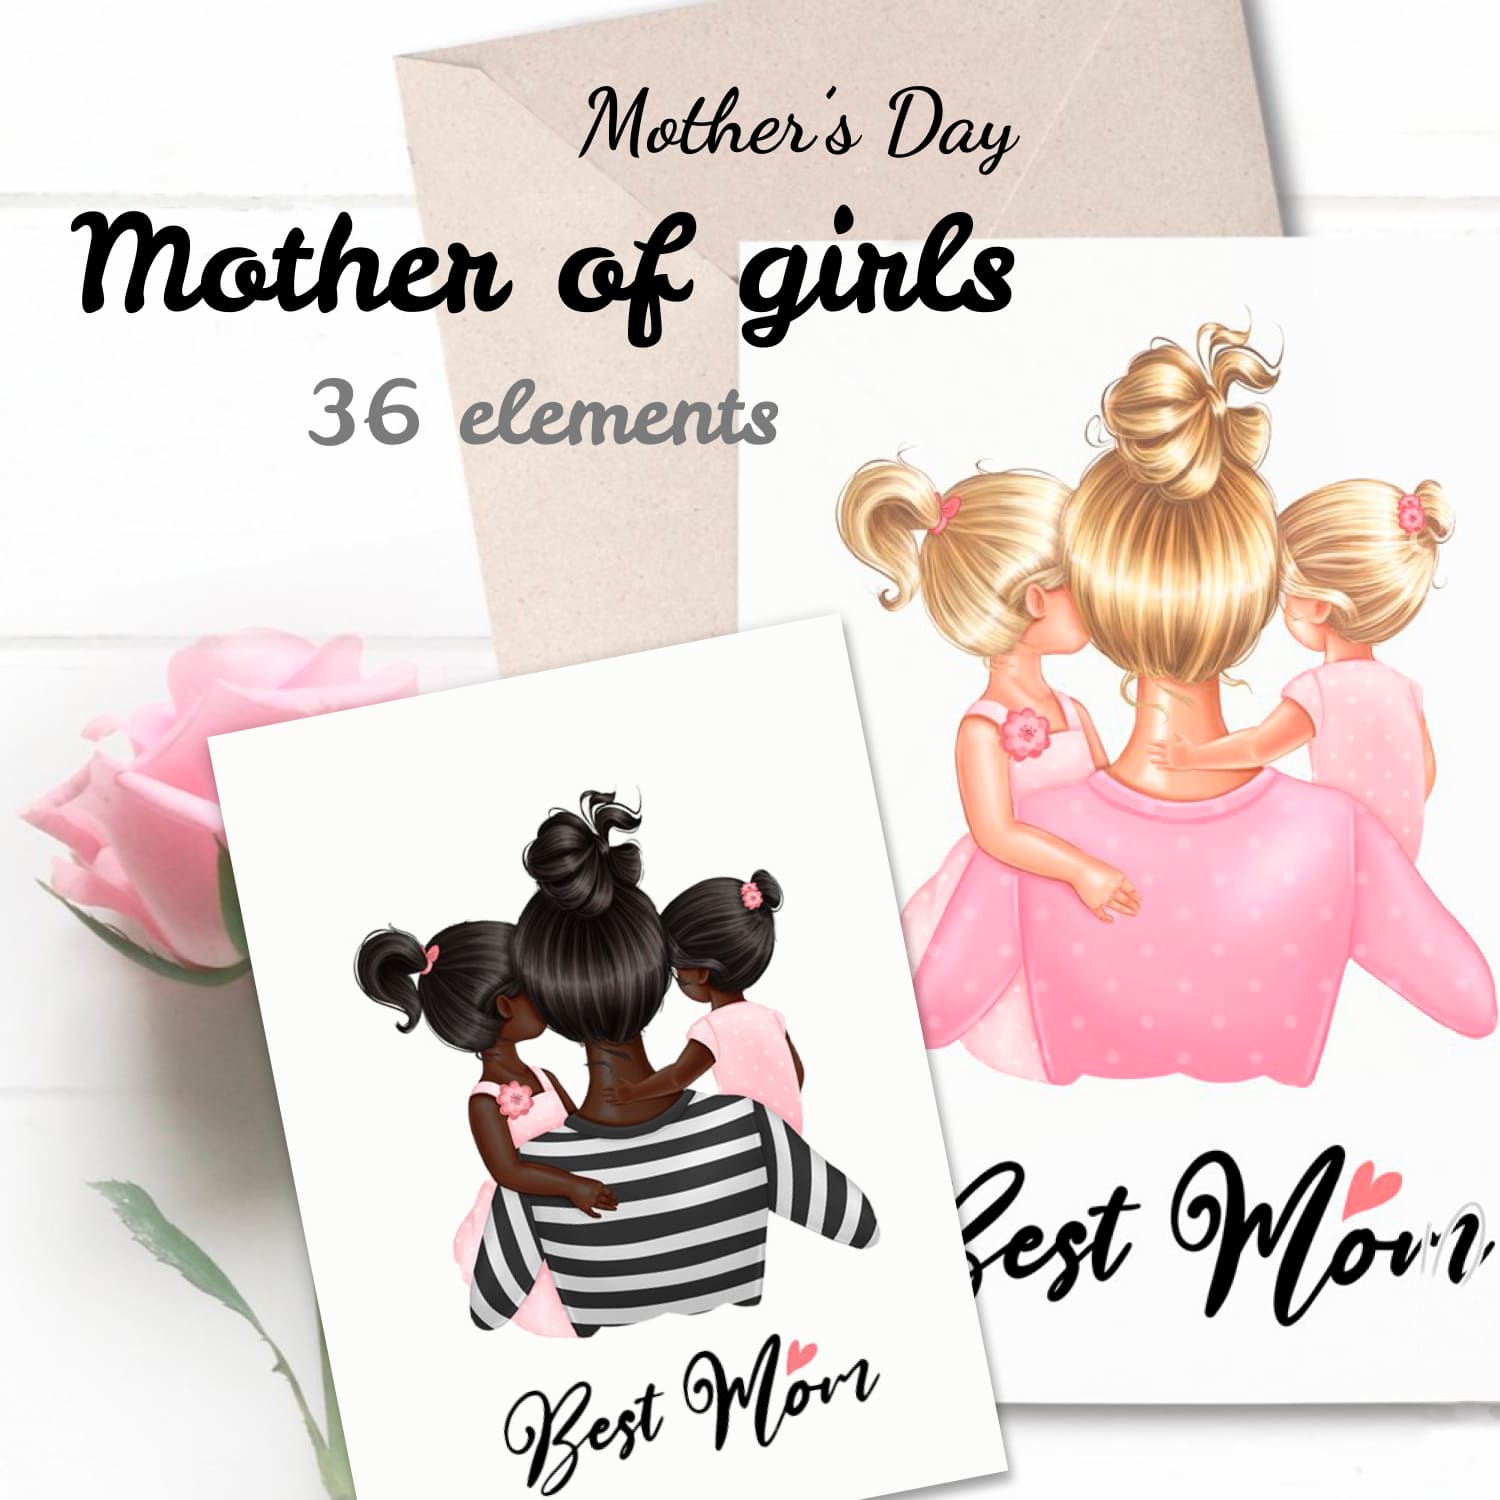 Sale! Mother Of Girls Mother’s Day.